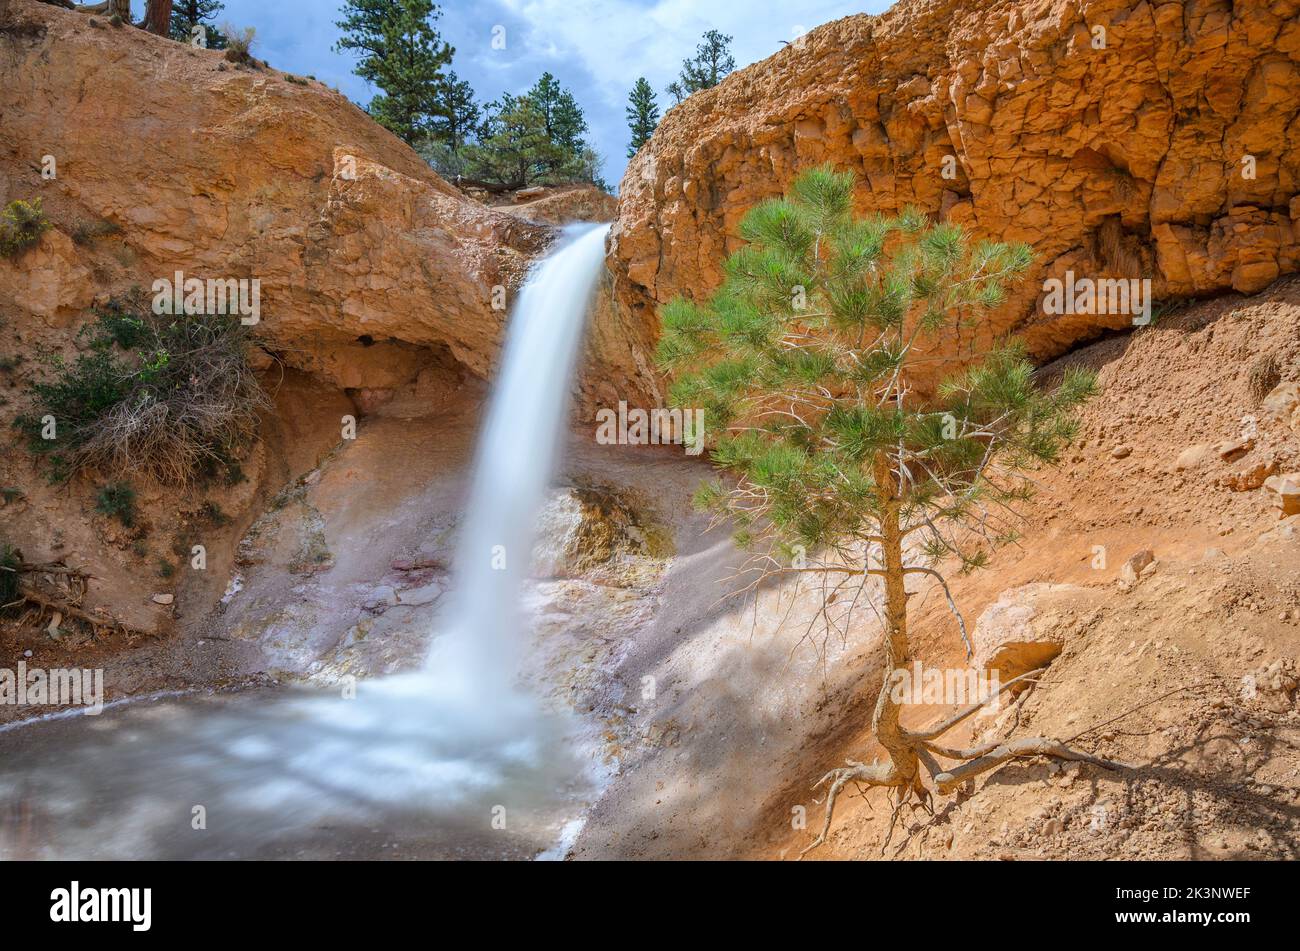 Mossy Cave Waterfall in Bryce Canyon National Park, Utah, USA Stock Photo